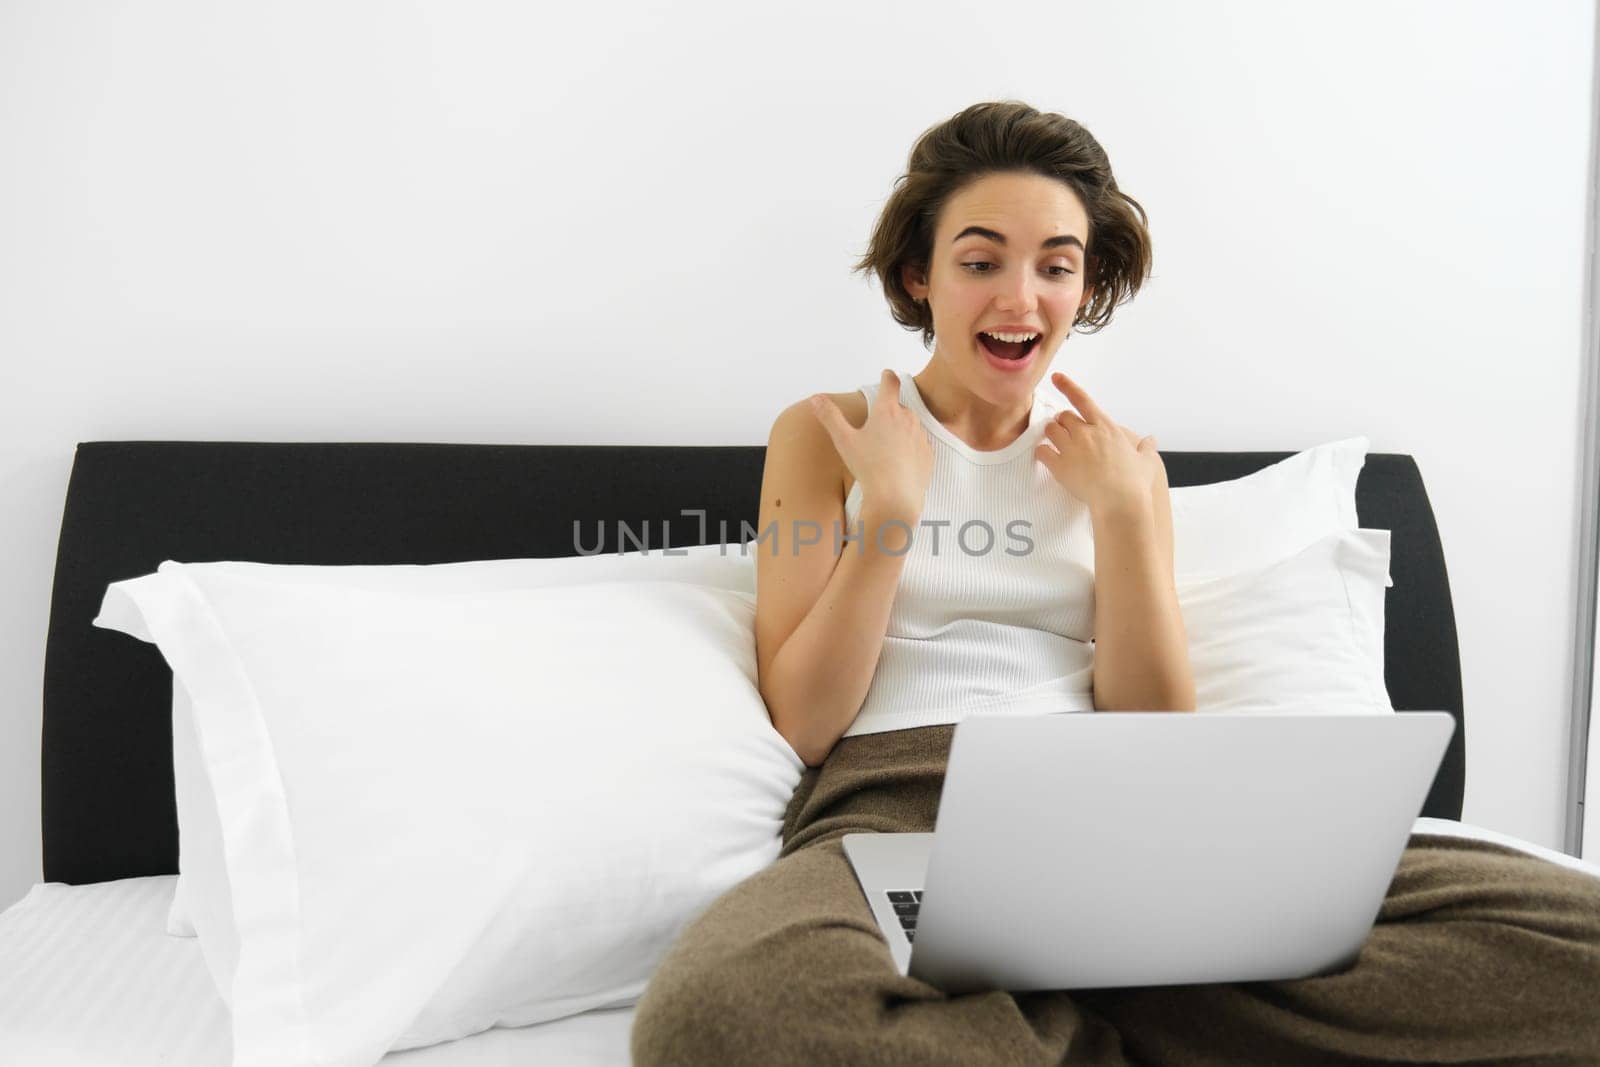 Portrait of woman sitting on bed with laptop, gasping and looking surprised at computer screen. Technology and lifestyle concept